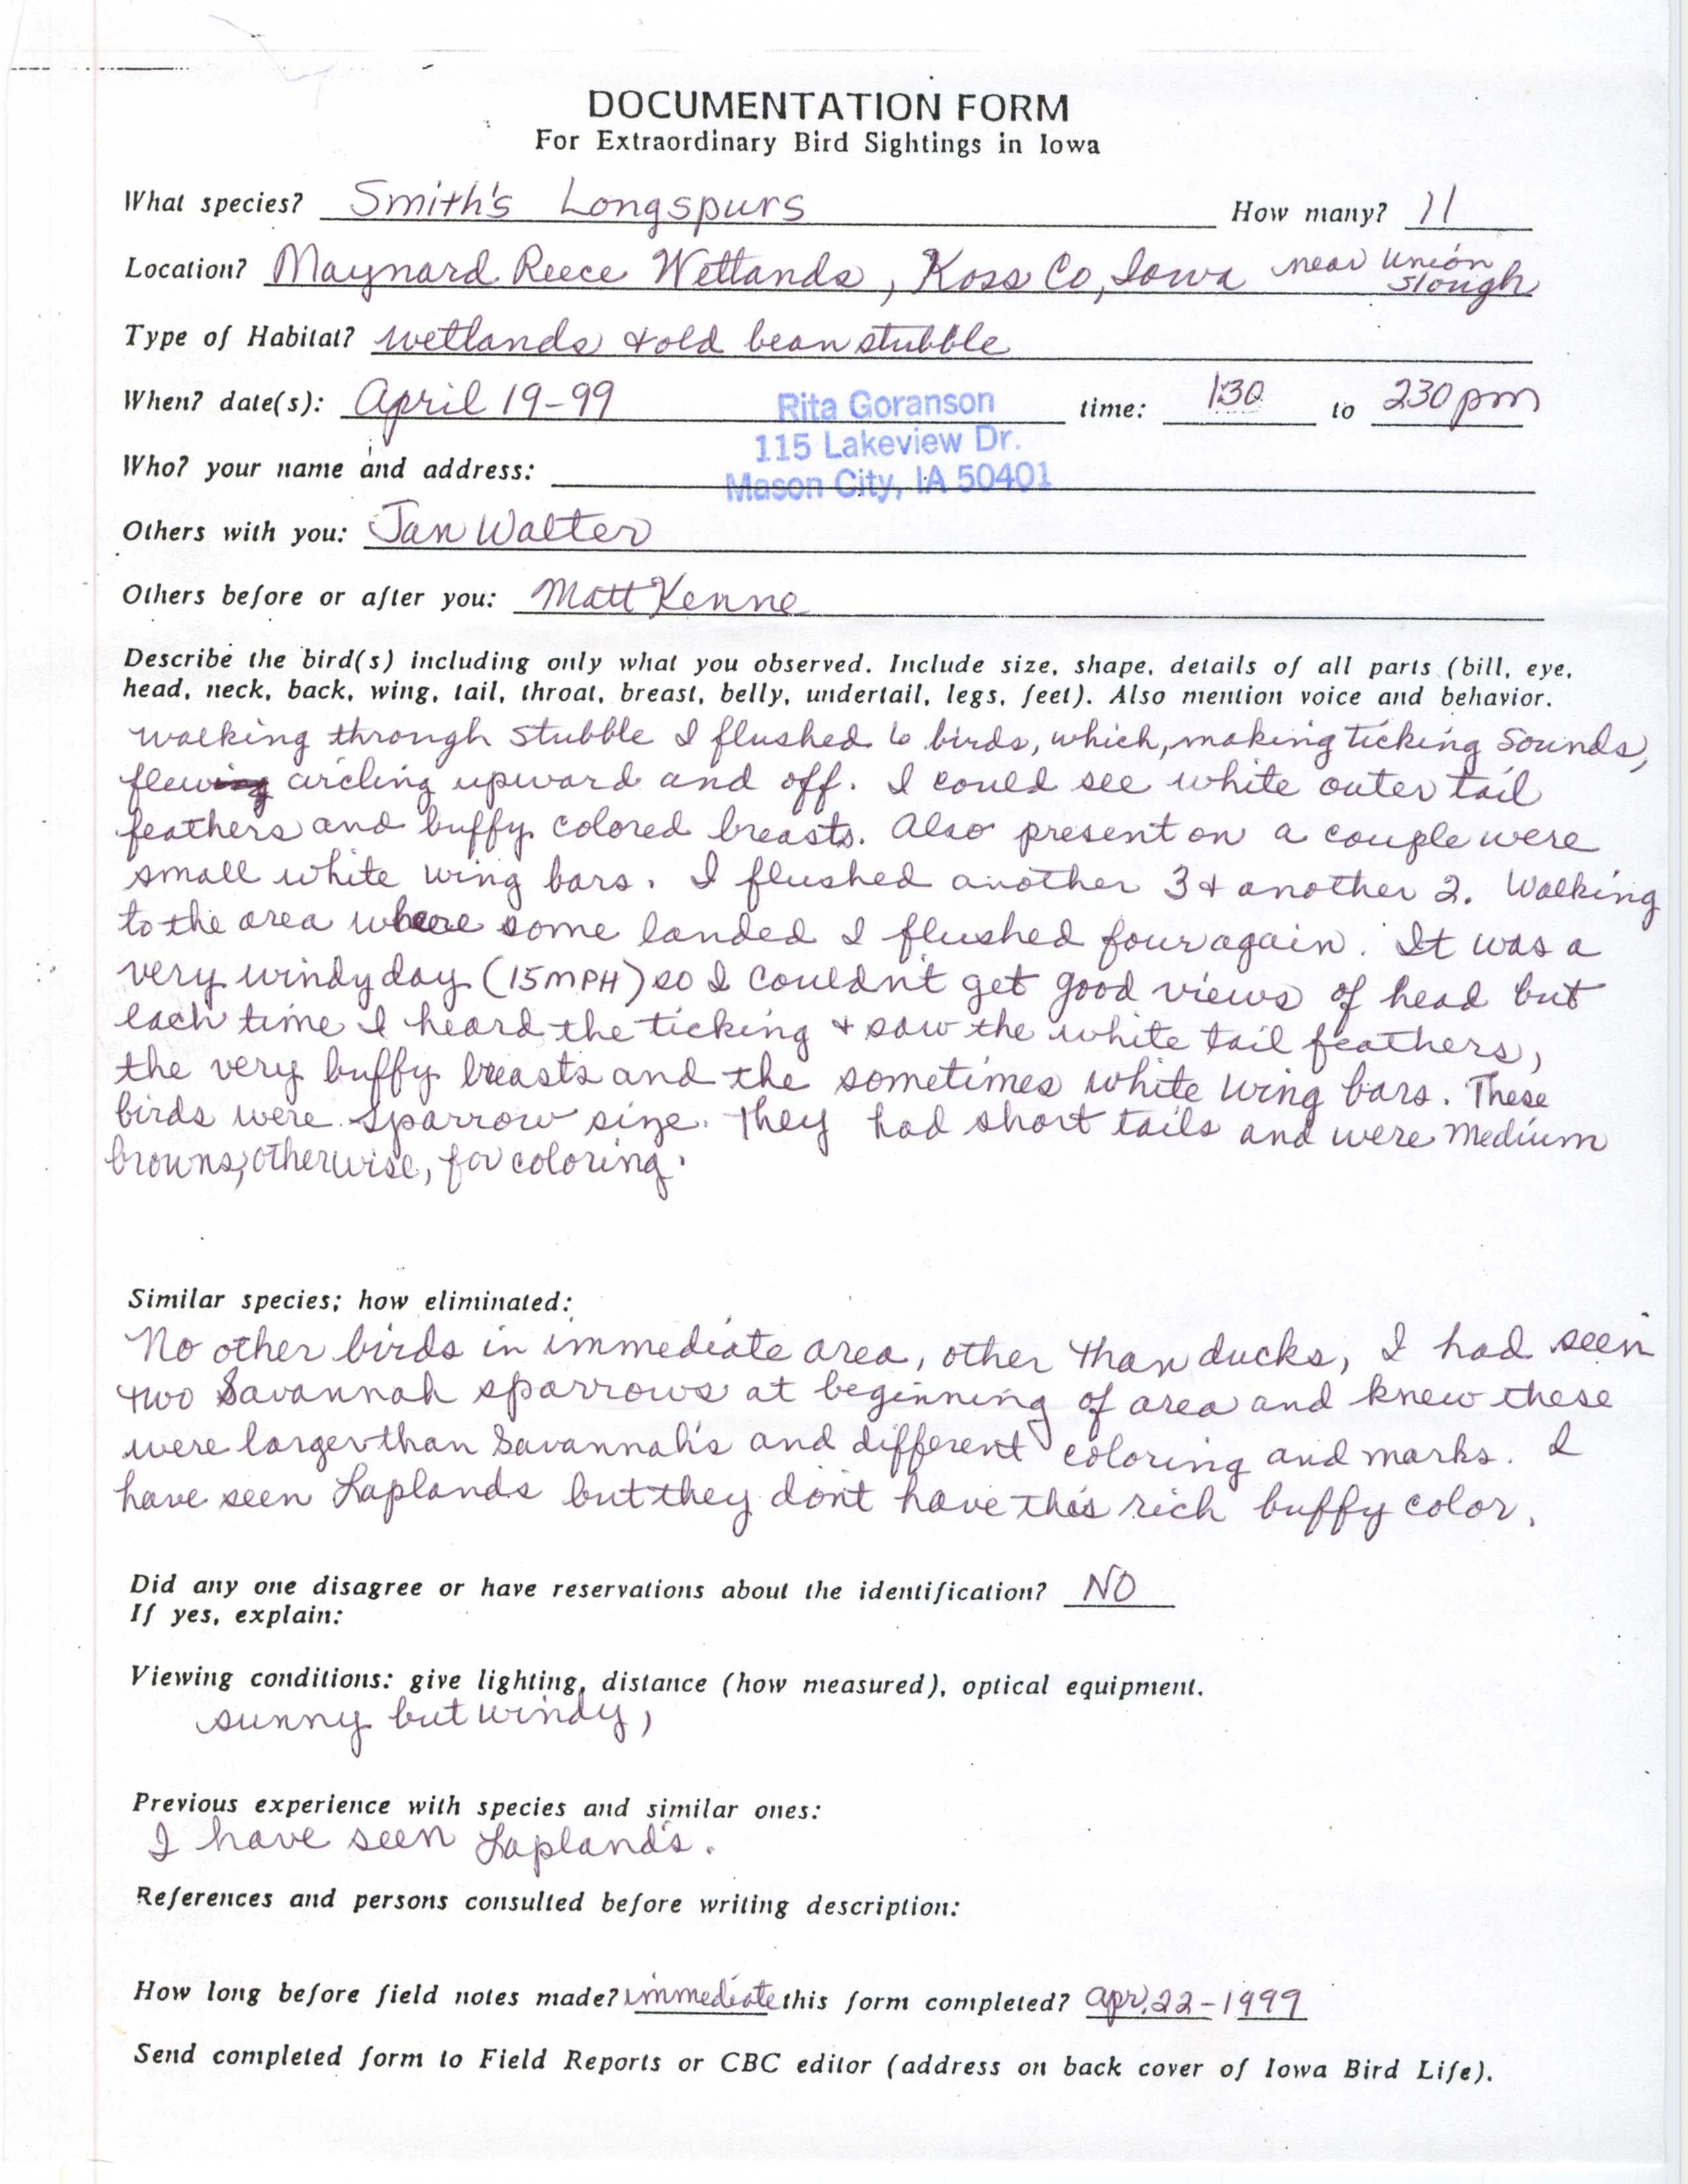 Rare bird documentation form for Smith's Longspurs at Maynard Reese Waterfowl Production Area, 1999